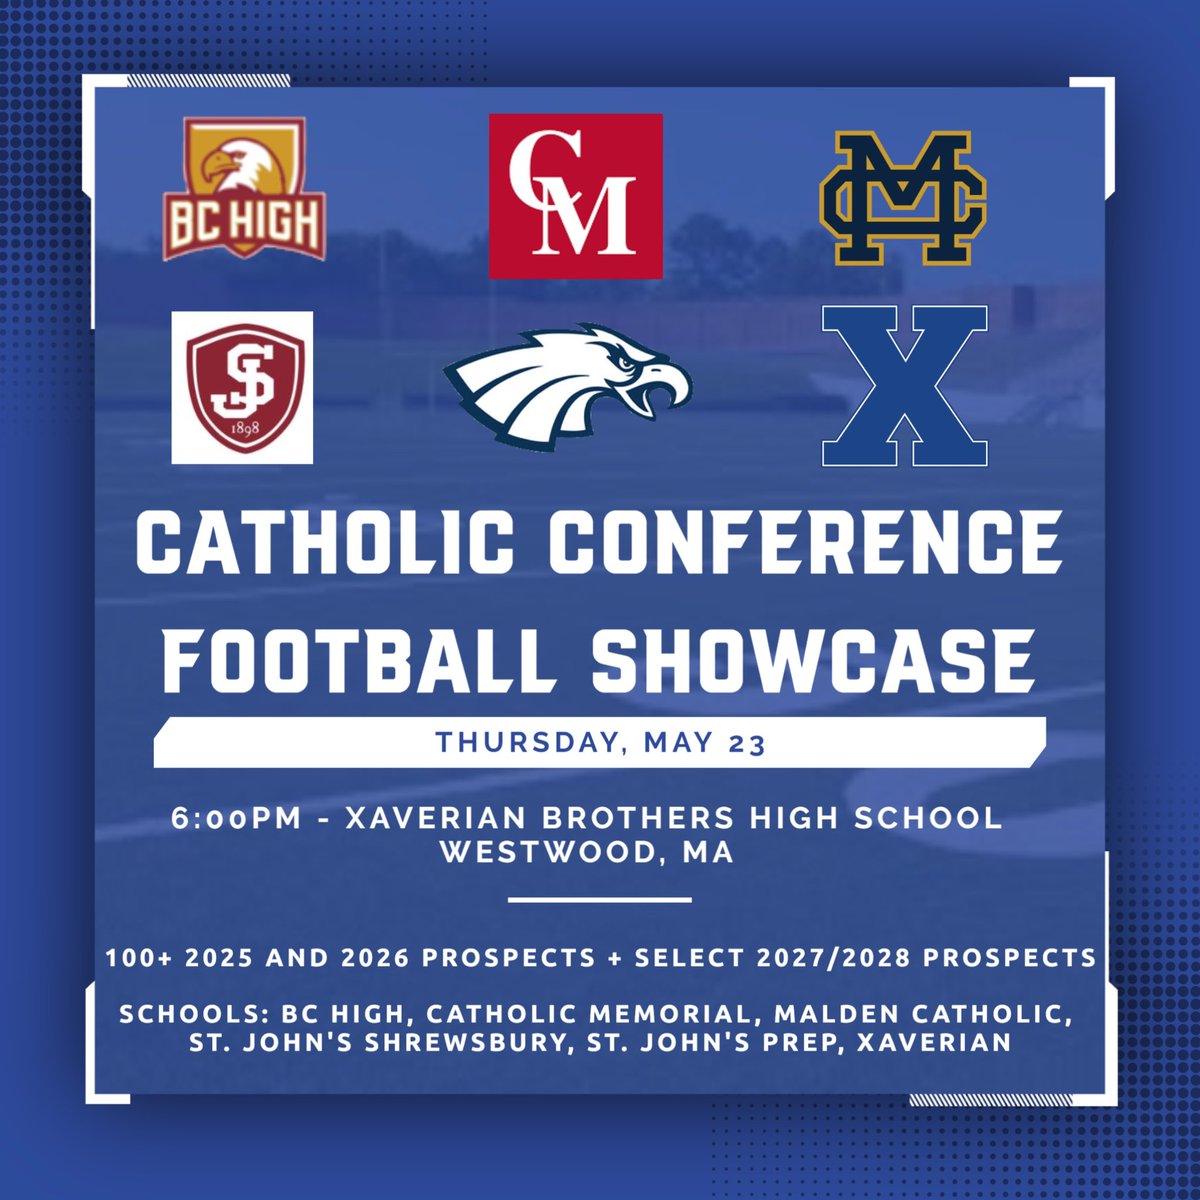 🏈 Catholic Conference Showcase 🏈 📍@Xaverian_Hawks (Westwood, MA) 6PM - Check-in 6:30PM- Linemen 7:30PM - Skill guys @StJohnsPrepFB @SaintJohnsFB @MC_LancersFB @CathMemKnights @bchighfootball Colleges - DM for full prospect list if you have not already received it.